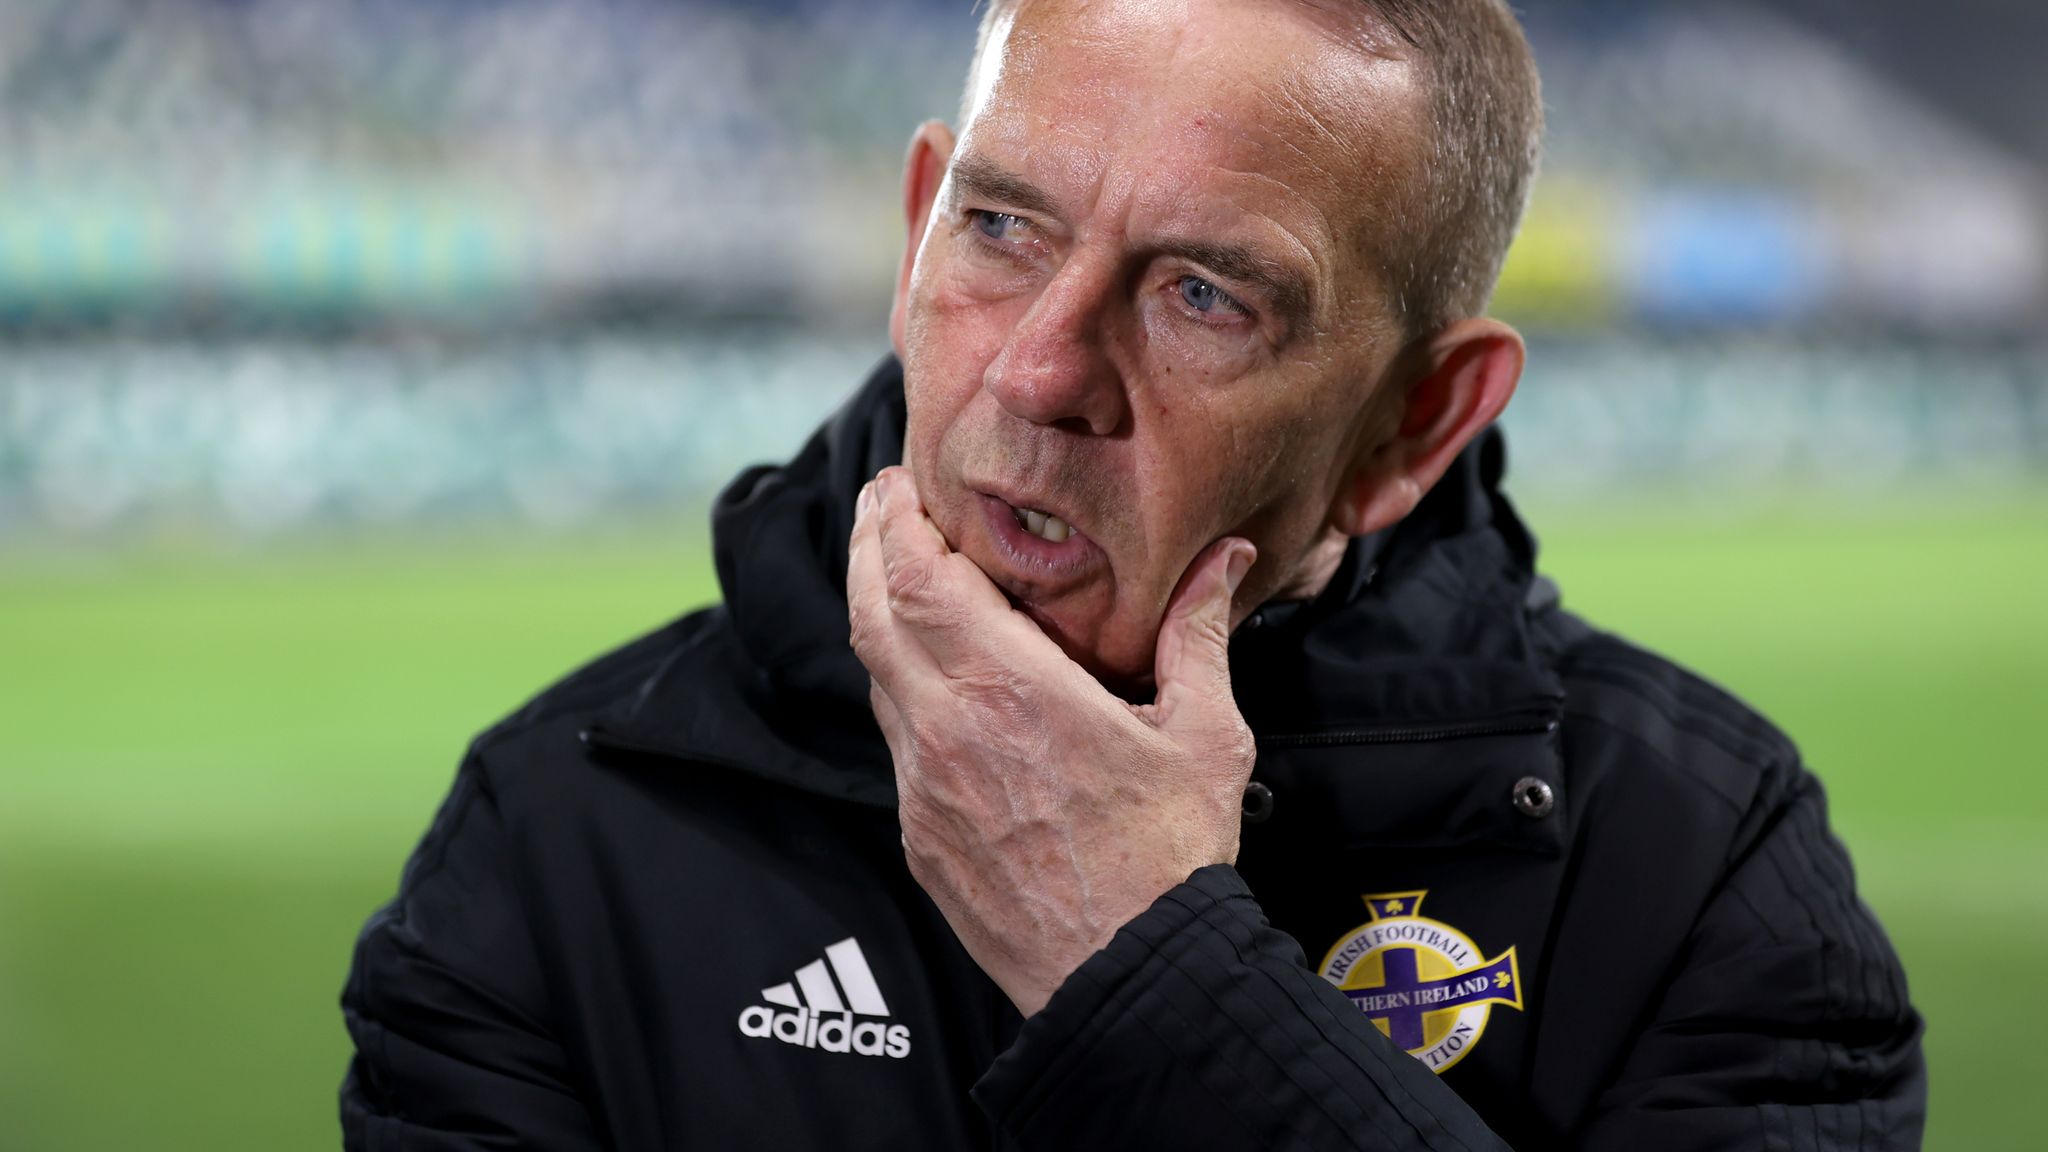 Northern Ireland boss Kenny Shiels apologises after saying women